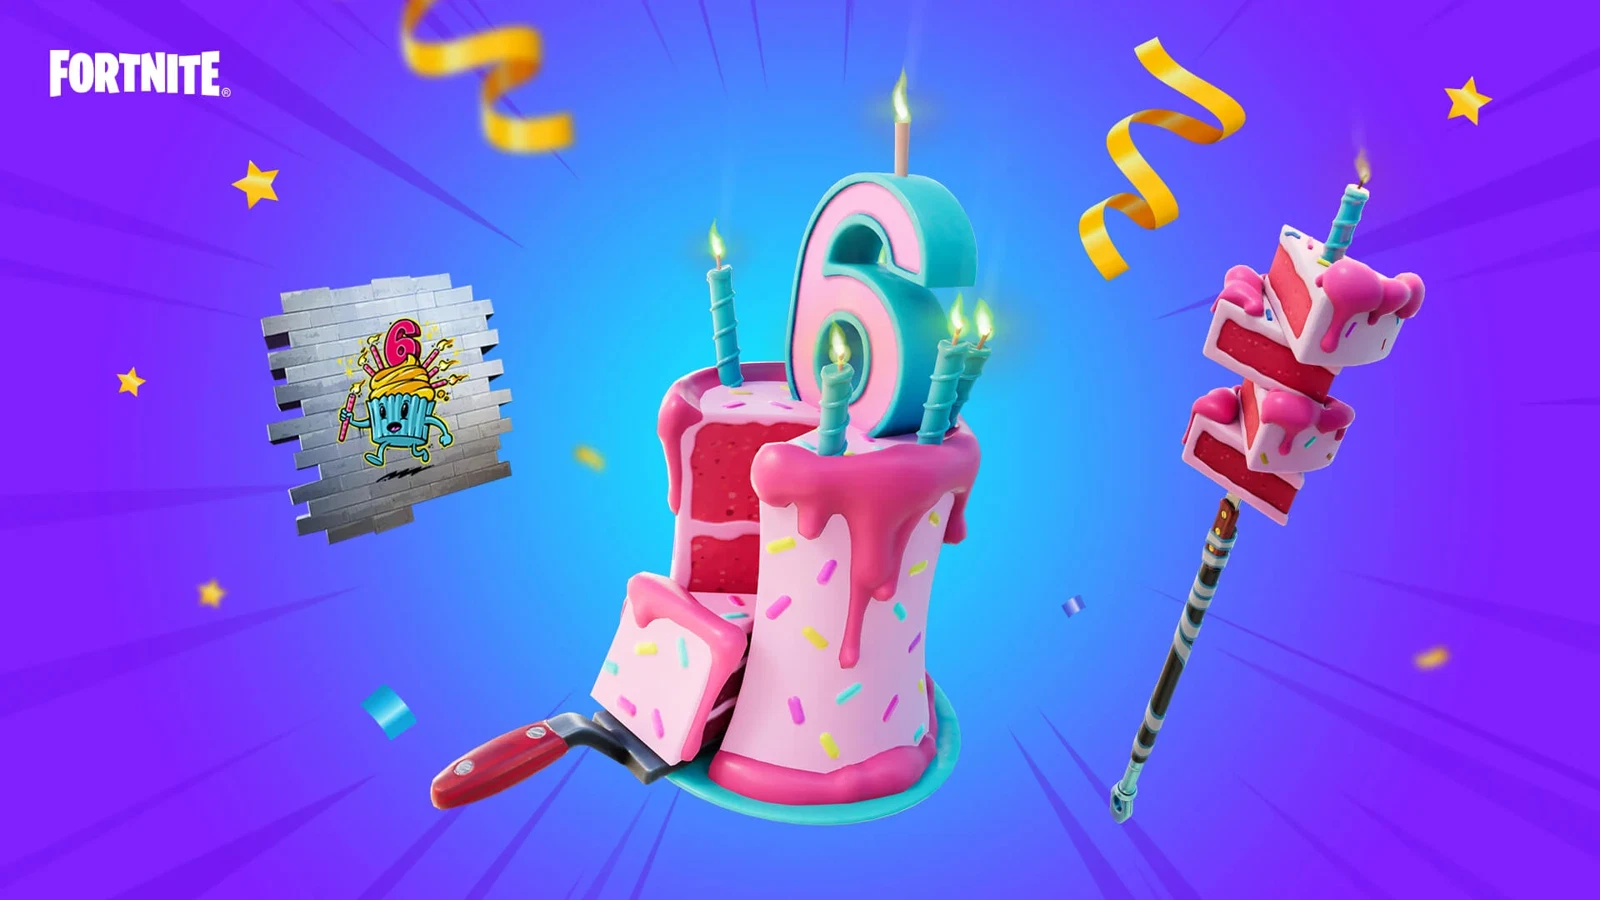 Fortnite Celebrates 6th Birthday with Fun Quests and Exciting Rewards